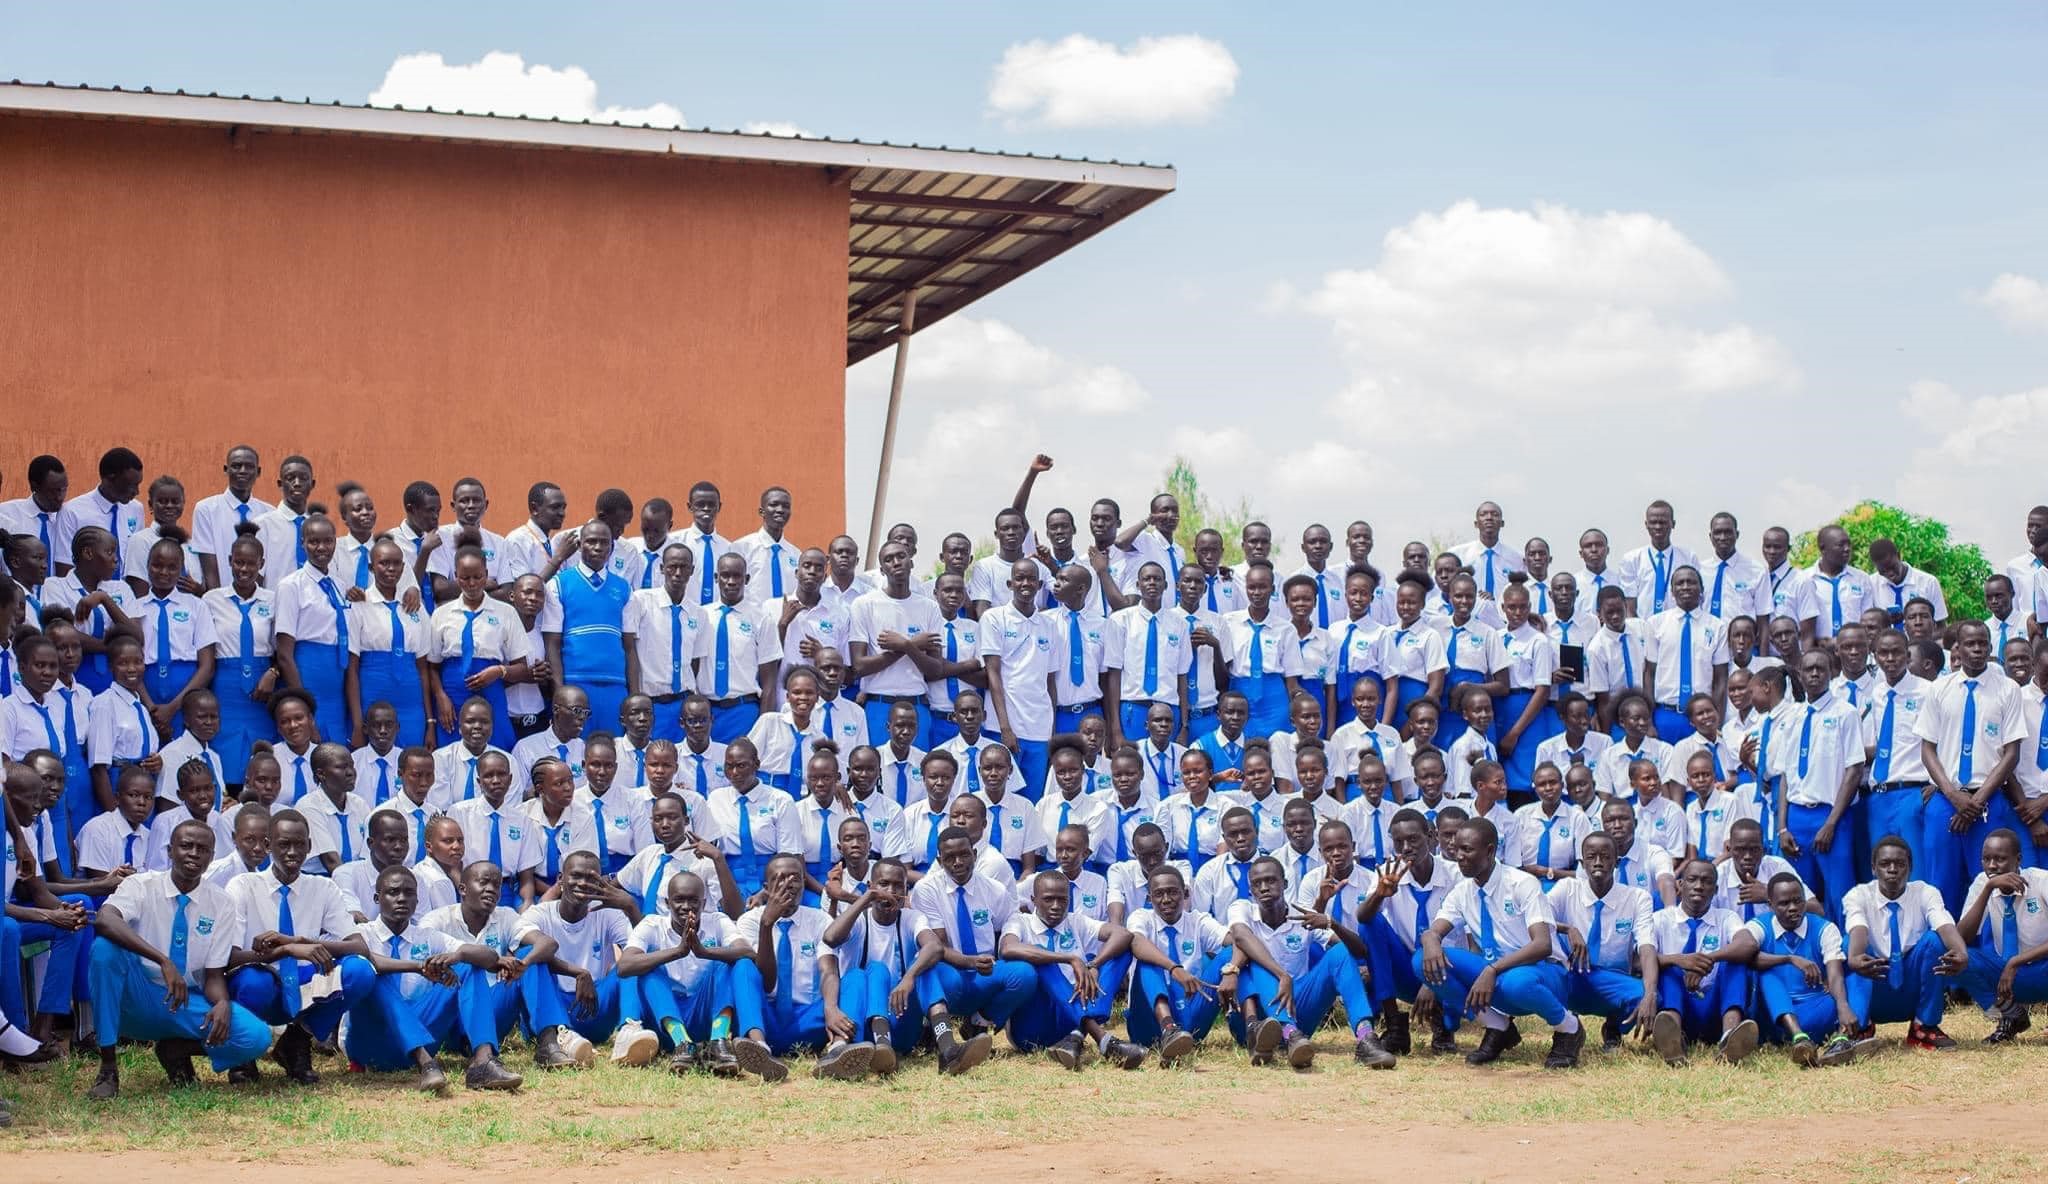 A large group of young of high school students from the Promised Land Primary and Secondary School in South Sudan wearing blue and white uniforms gather to take a photo.